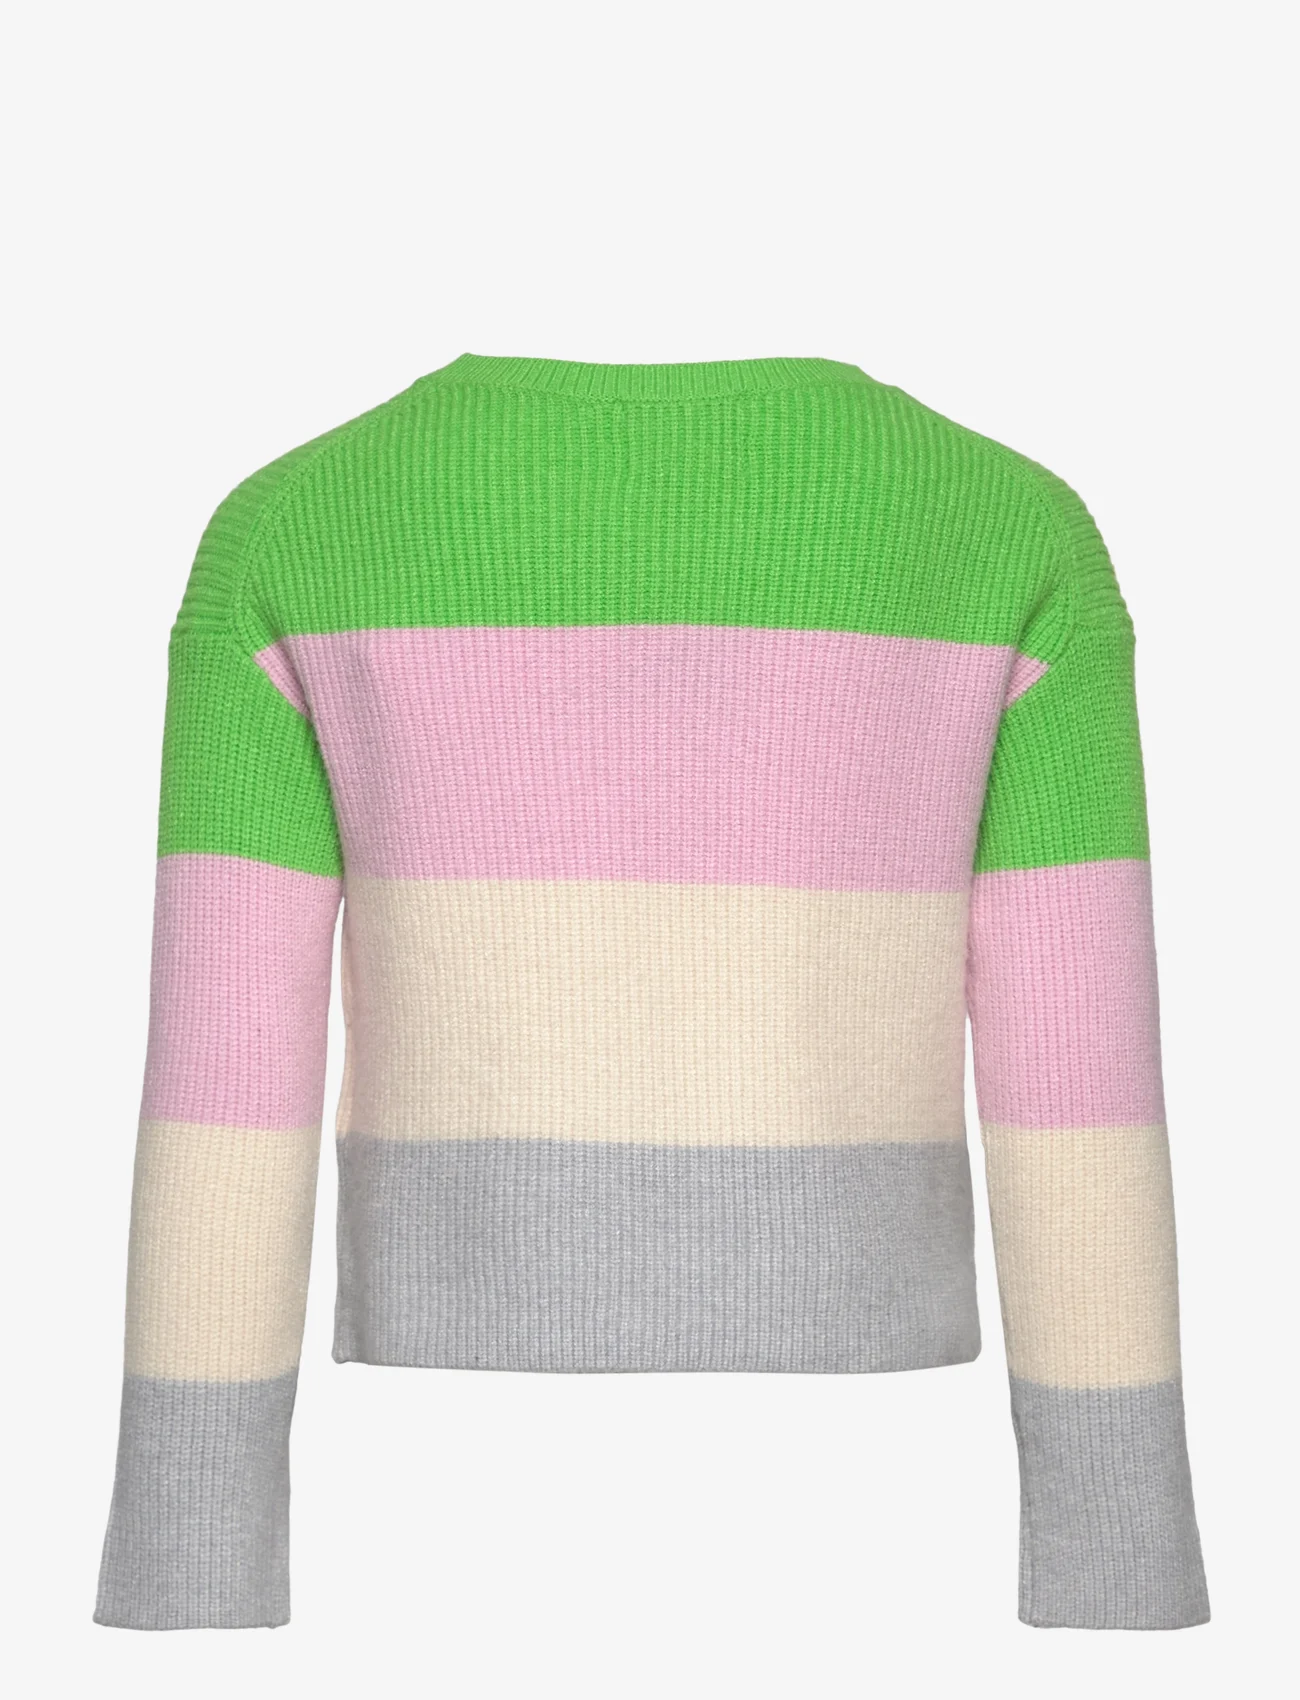 Tom Tailor - striped sweater - jumpers - green pink multicolor stripe - 1